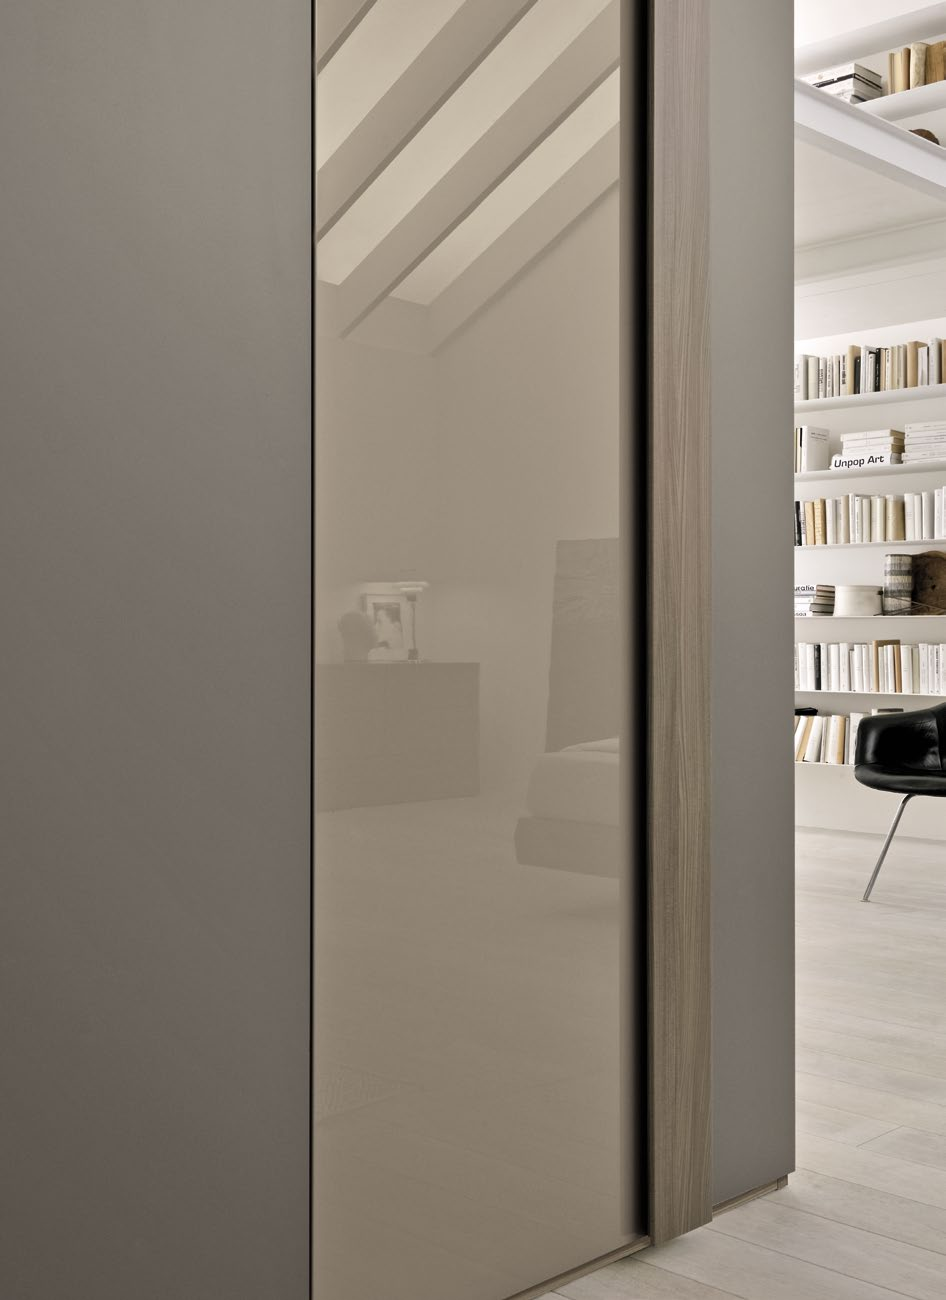 clean line wardrobe with smooth door, enriched A by the new finishes and handles that allow